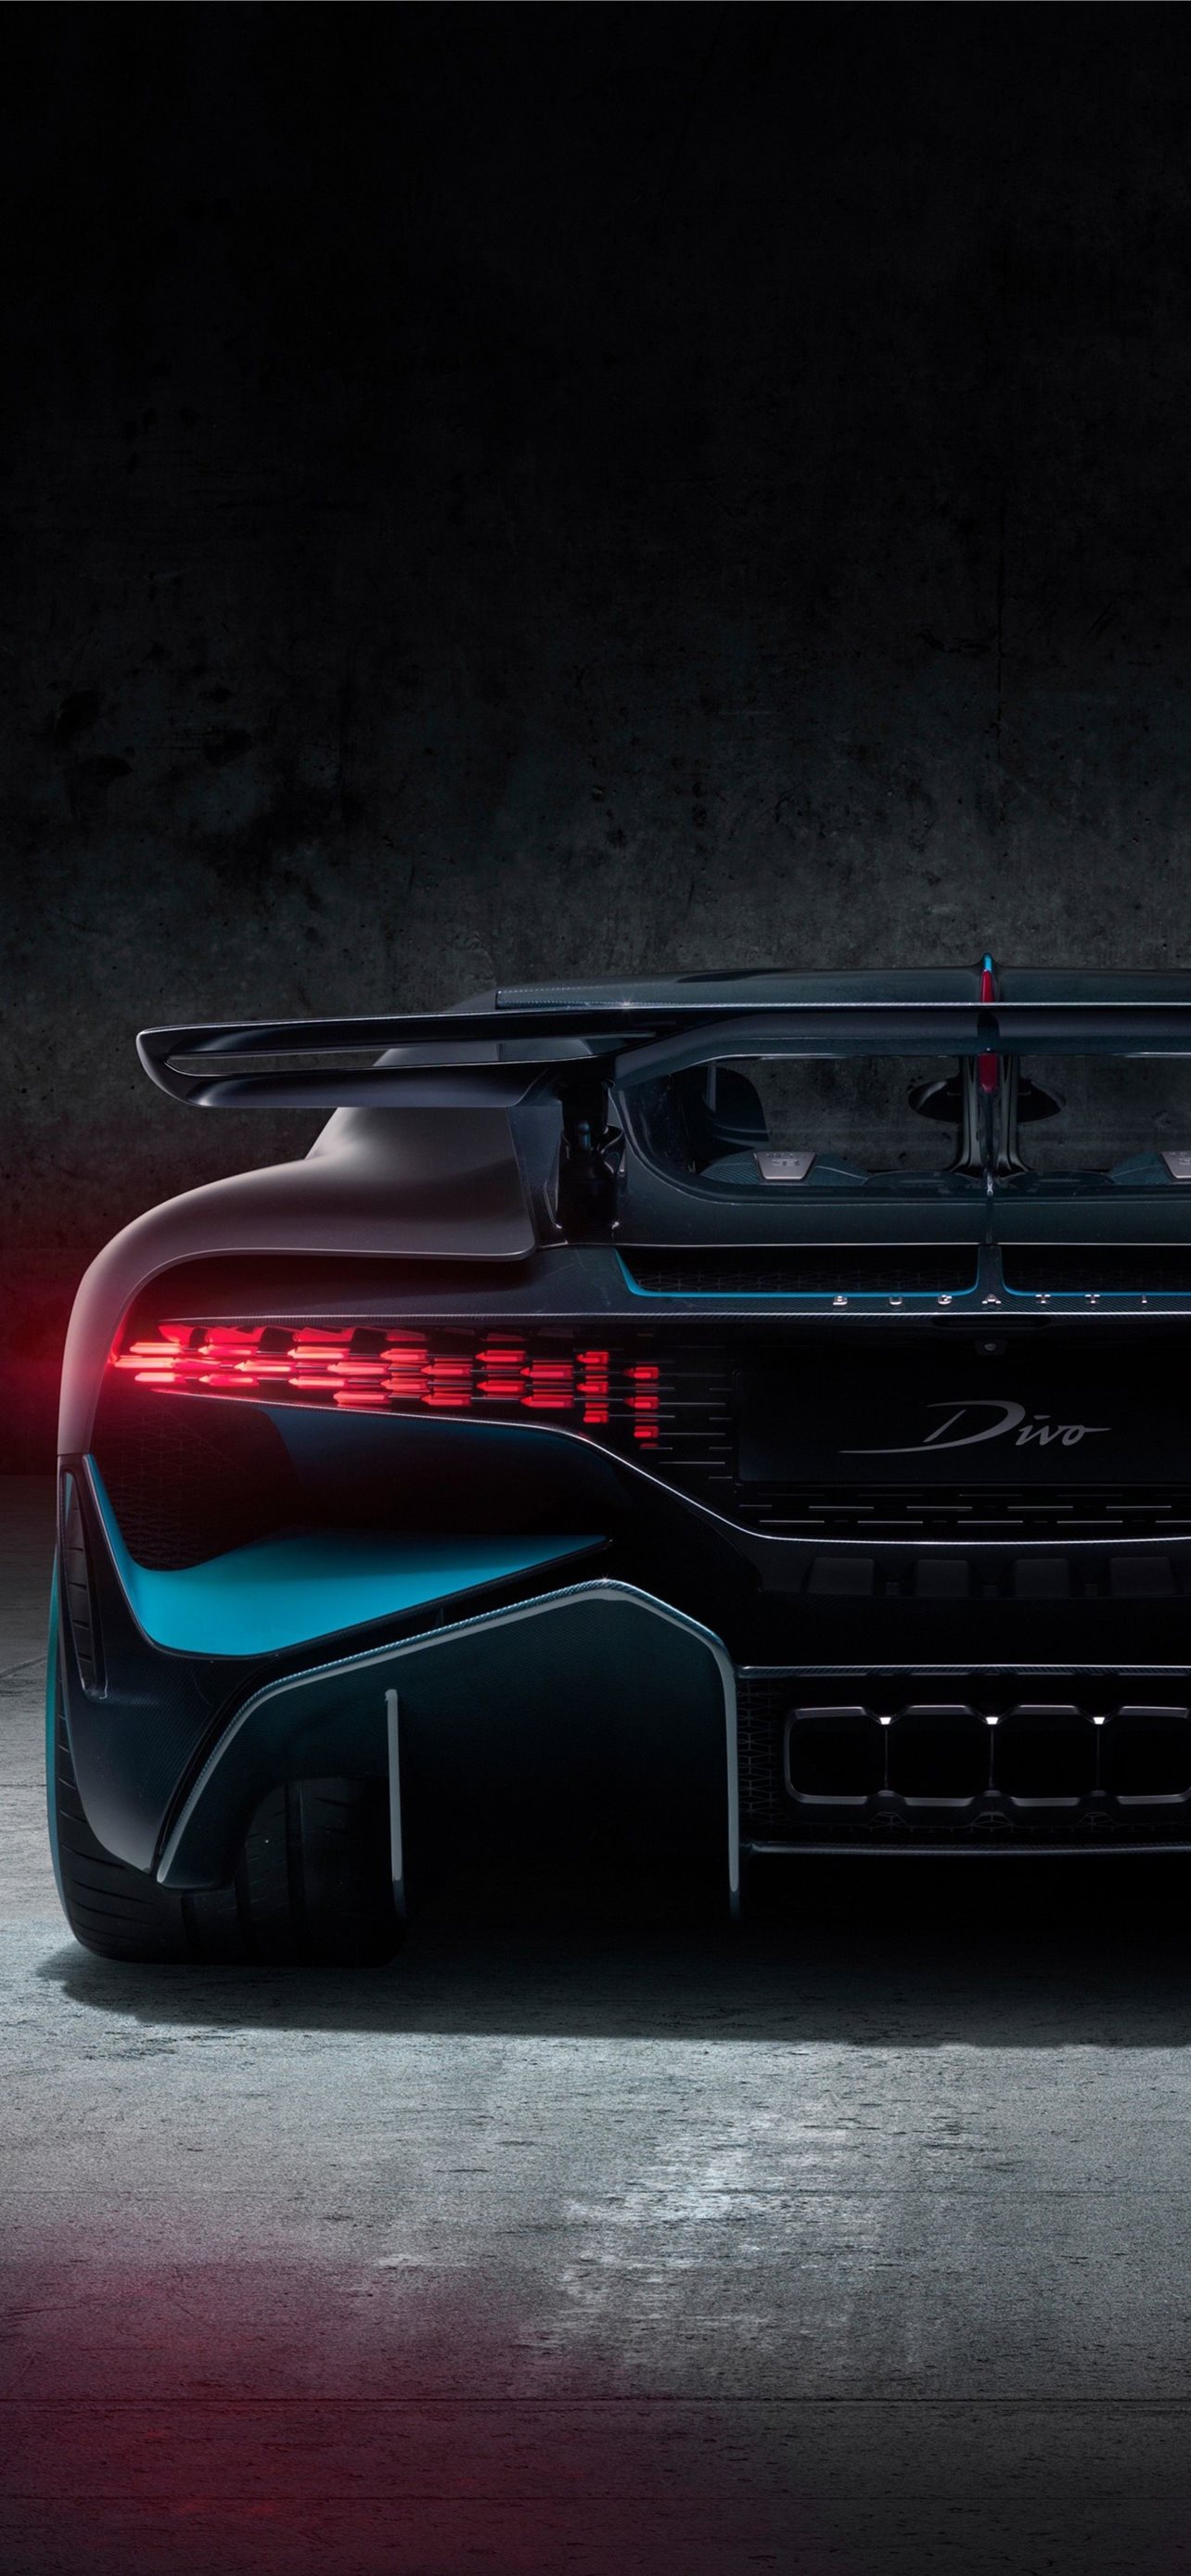 Bugatti Divo 2018 The fastest cars in the world Sp. iPhone Wallpaper Free Download